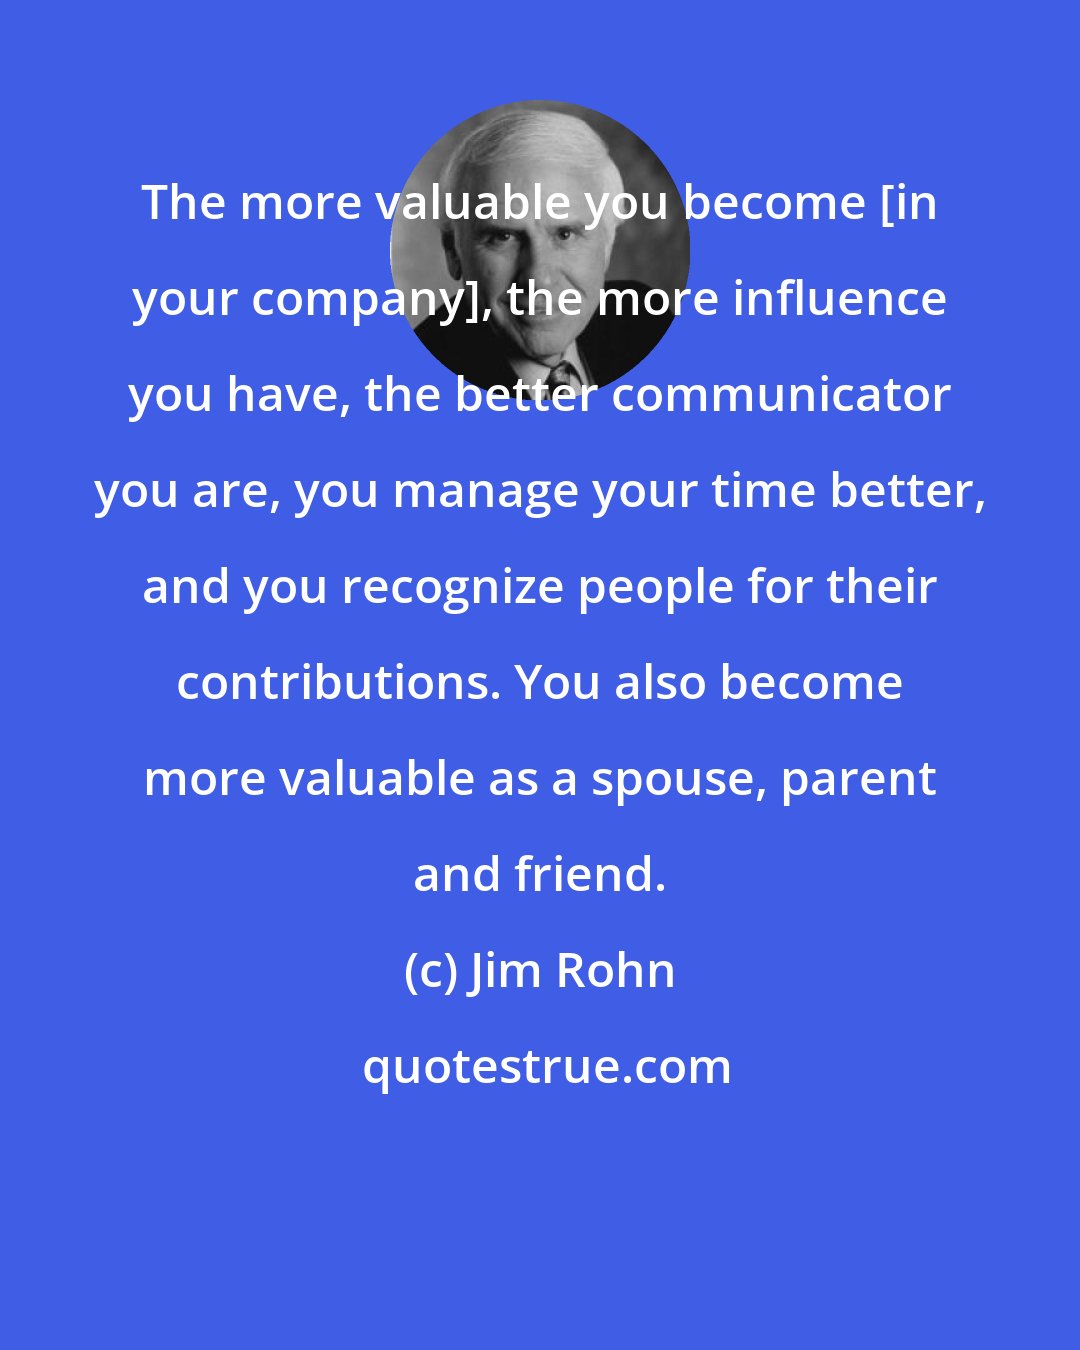 Jim Rohn: The more valuable you become [in your company], the more influence you have, the better communicator you are, you manage your time better, and you recognize people for their contributions. You also become more valuable as a spouse, parent and friend.